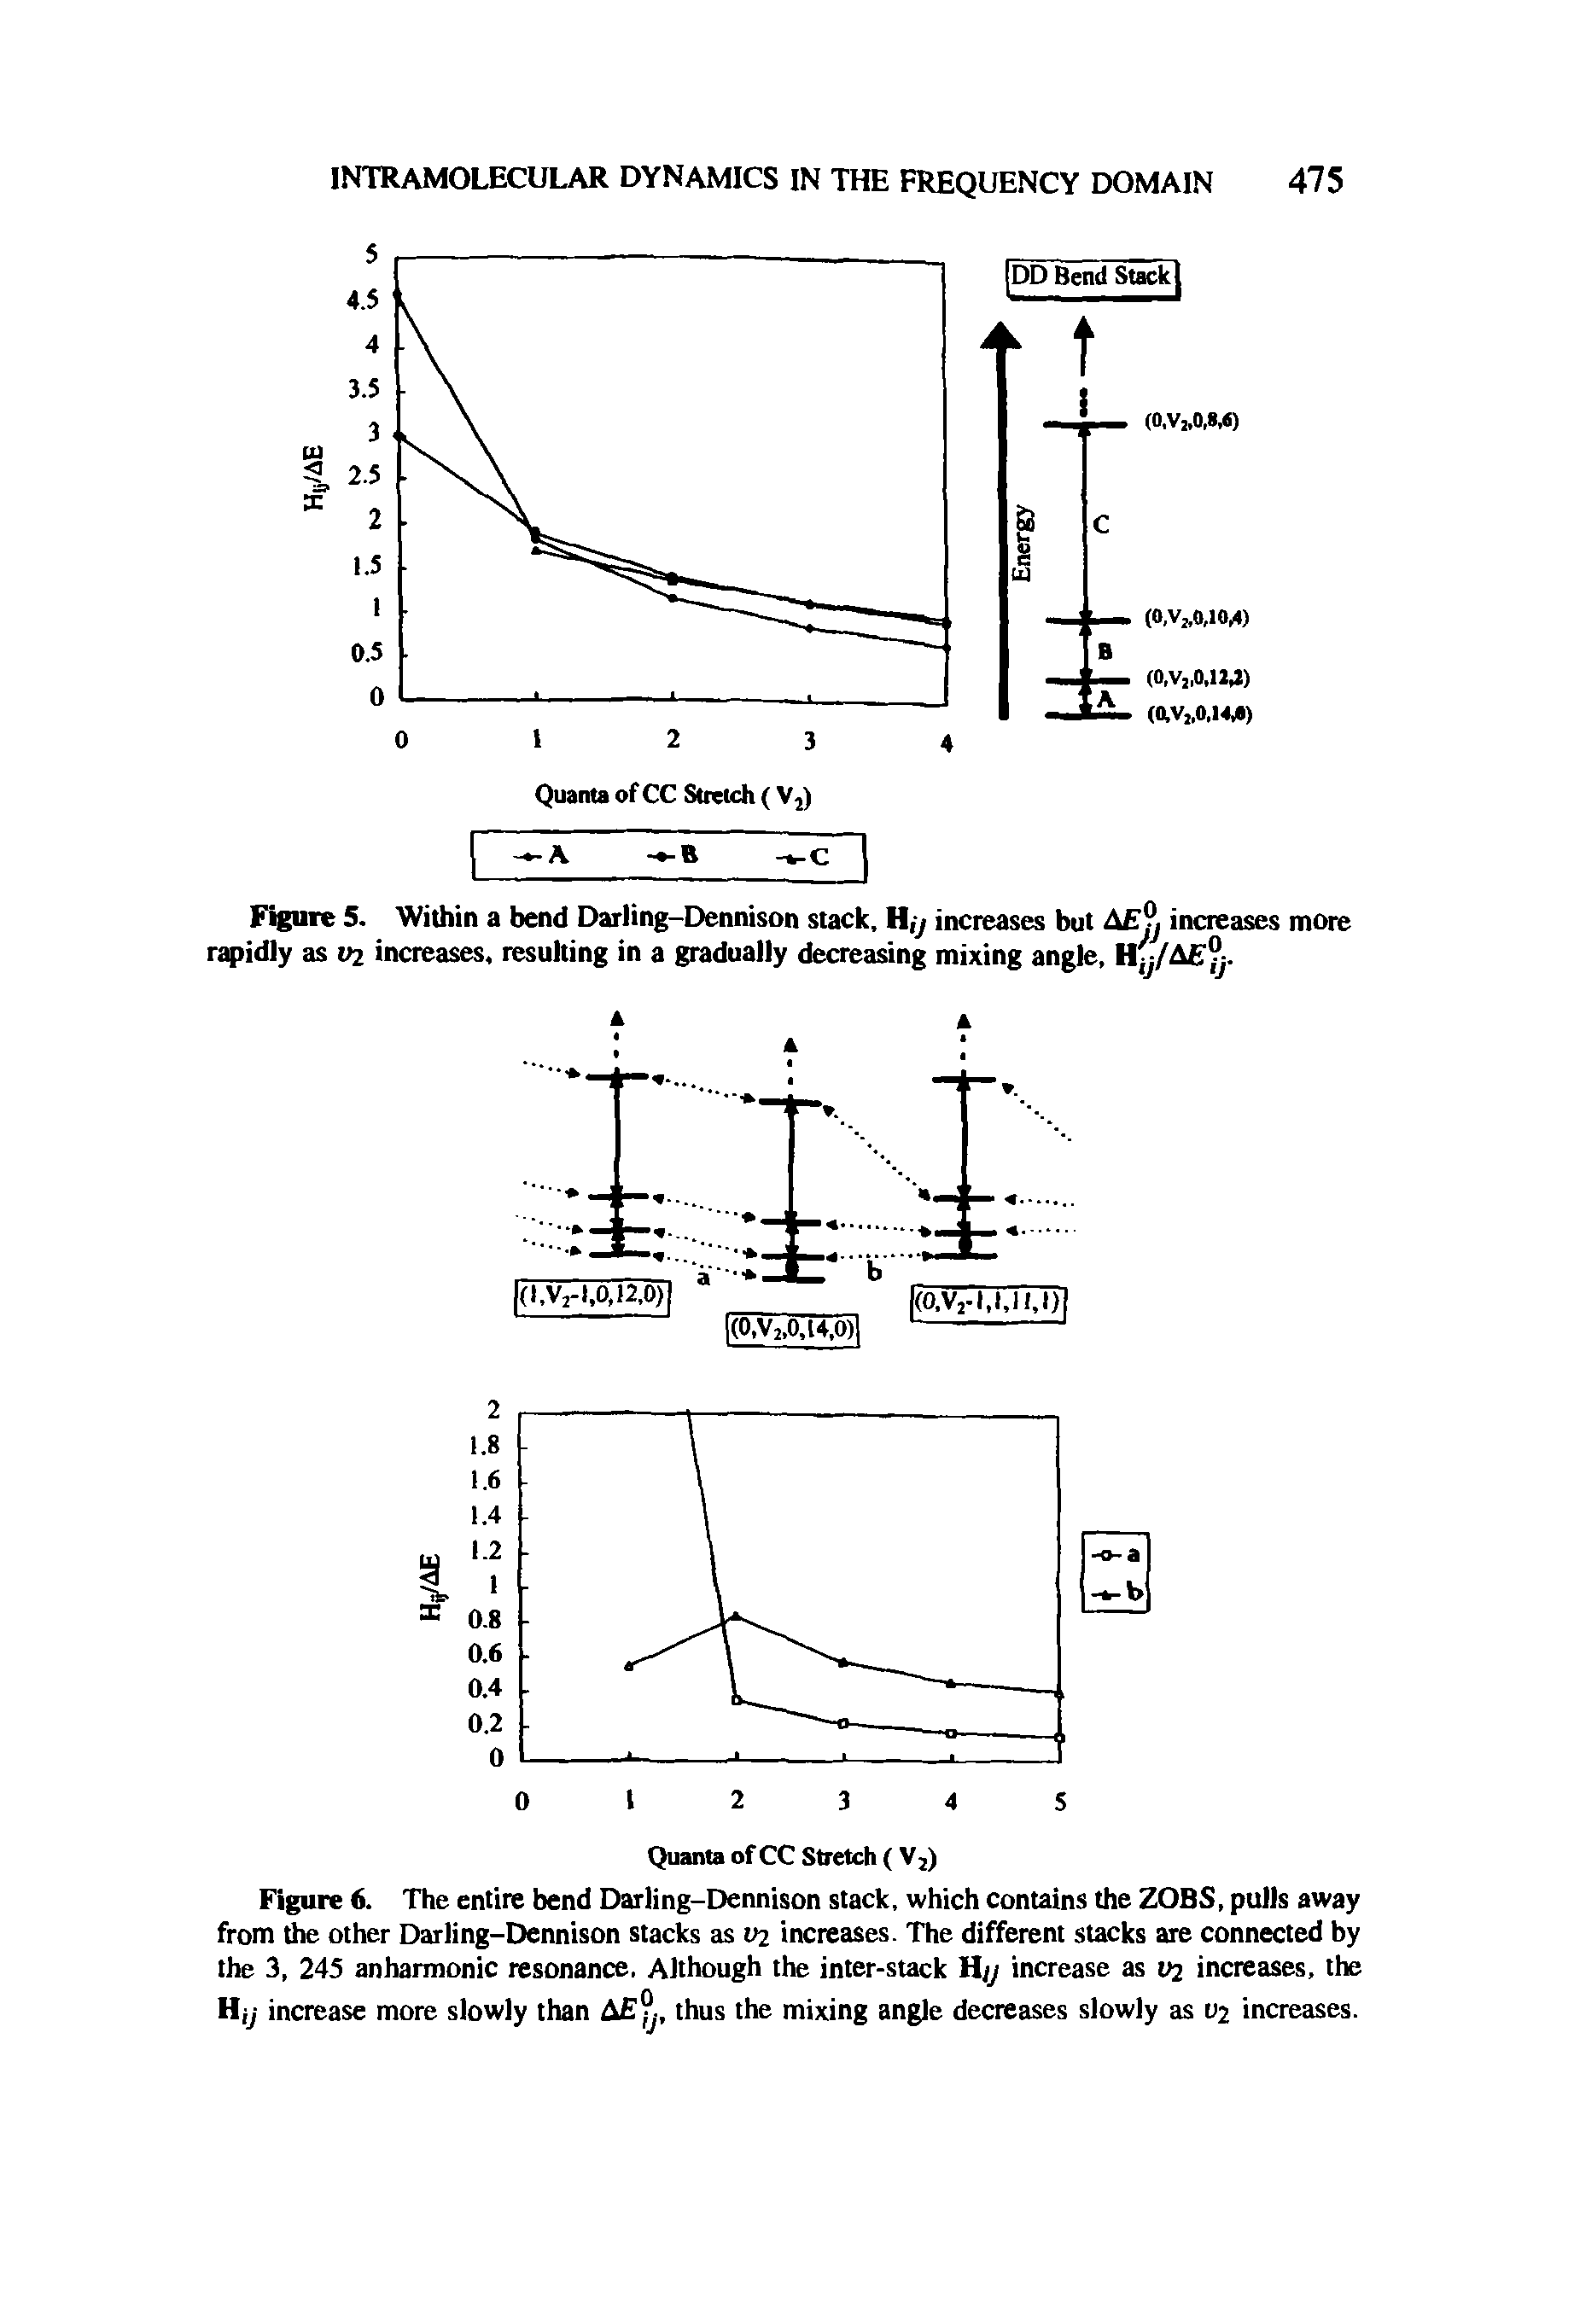 Figure 6. The entire bend Darling-Dennison stack, which contains the ZOBS, pulls away from the other Darling-Dennison stacks as V2 increases. The different stacks are connected by the 3, 245 anharmonic resonance, Although the inter-stack Hy increase as V2 increases, the Hy increase more slowly than A -, thus the mixing angle decreases slowly as vz increases.